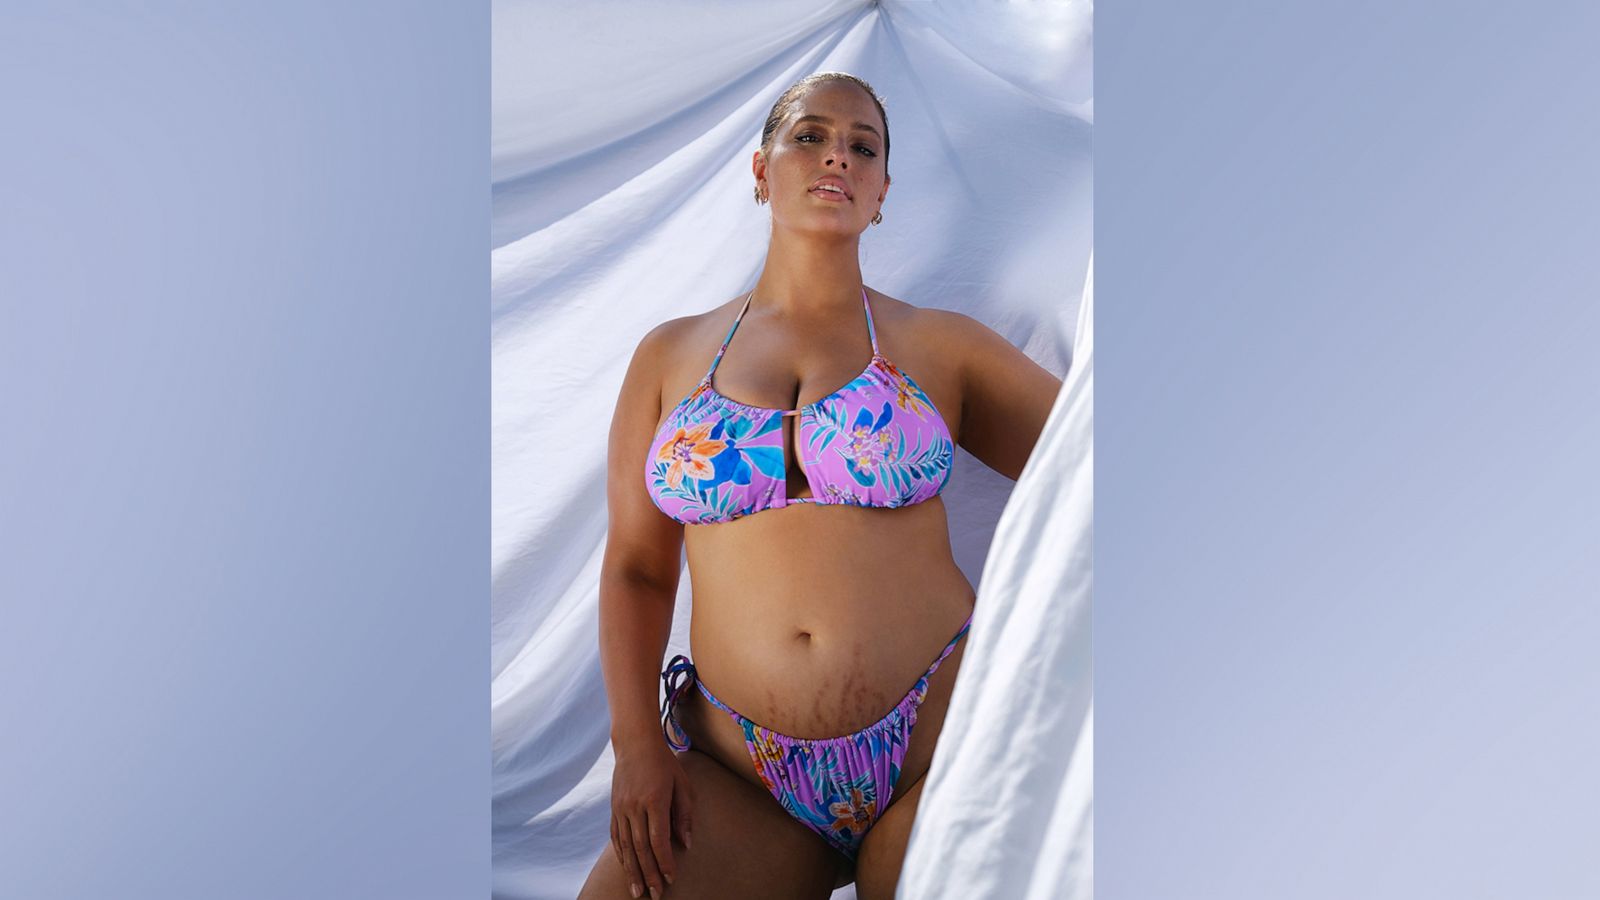 Ashley Graham embraces stretch marks in 'Swimsuits For All' campaign shoot  - ABC News